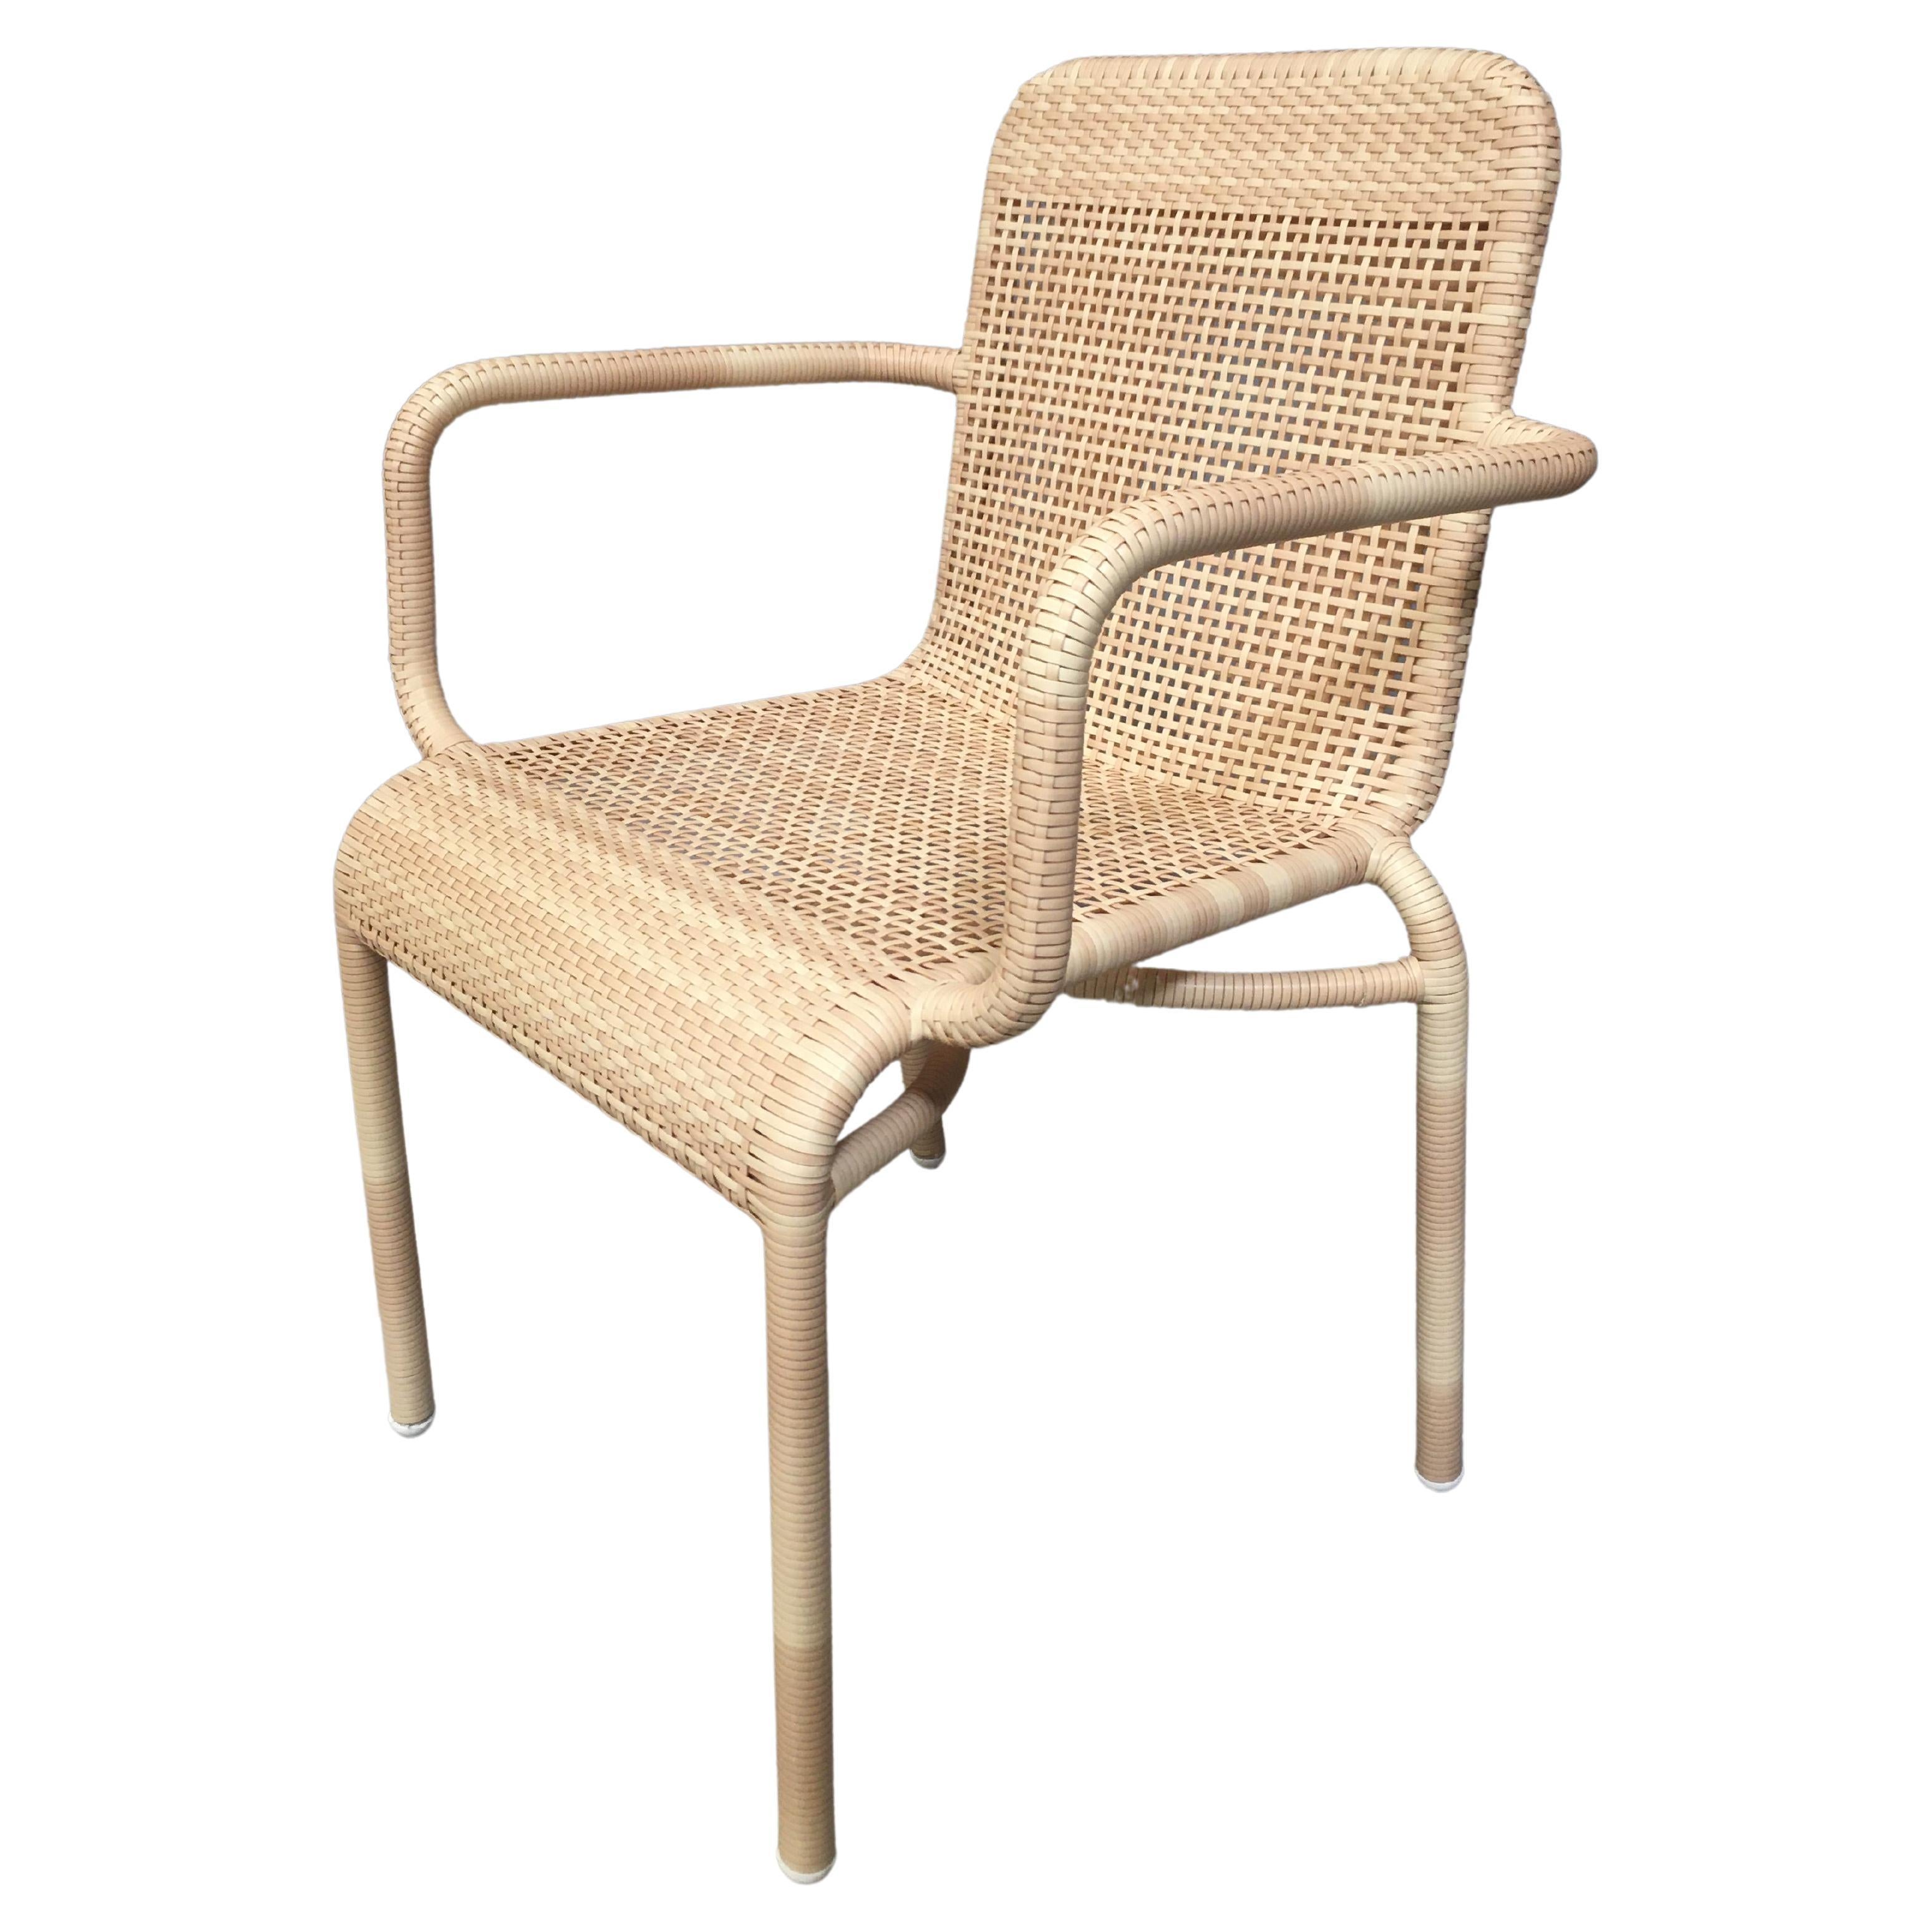 Outdoor Armchair in a Braided Resin Rattan Effect